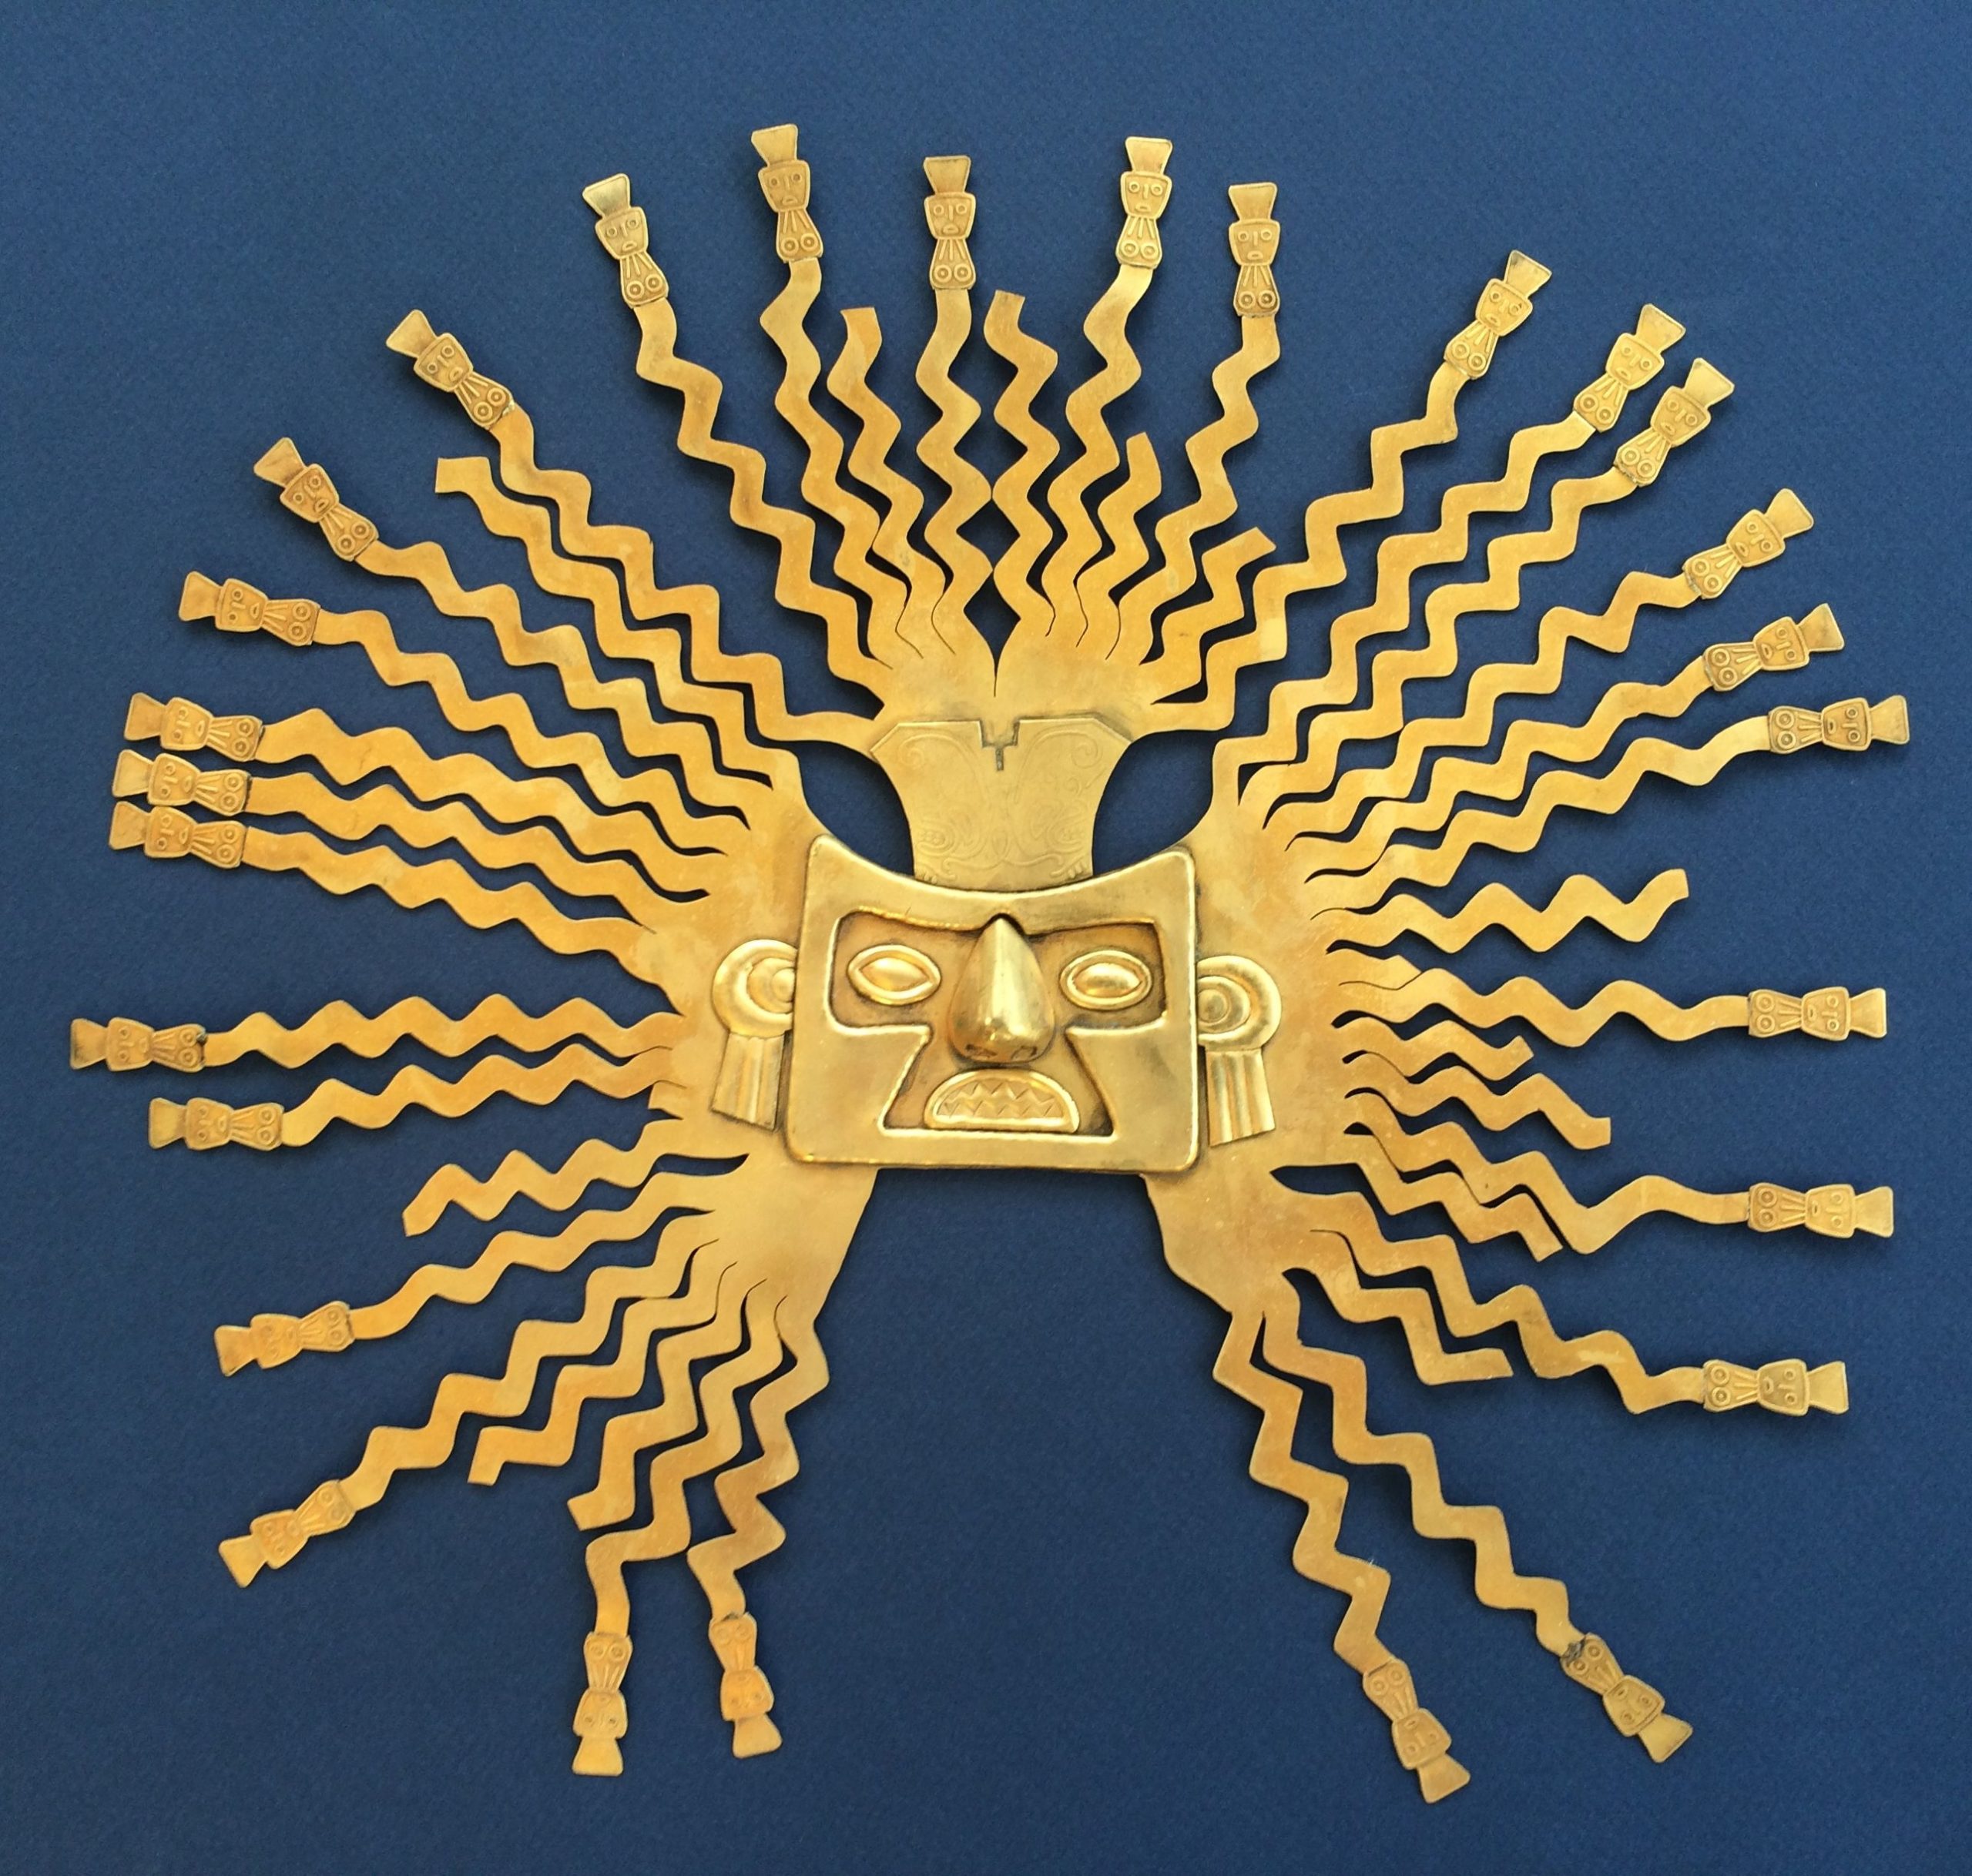 A photo of a golden mask of Inti, the Sun God in Andean mythology